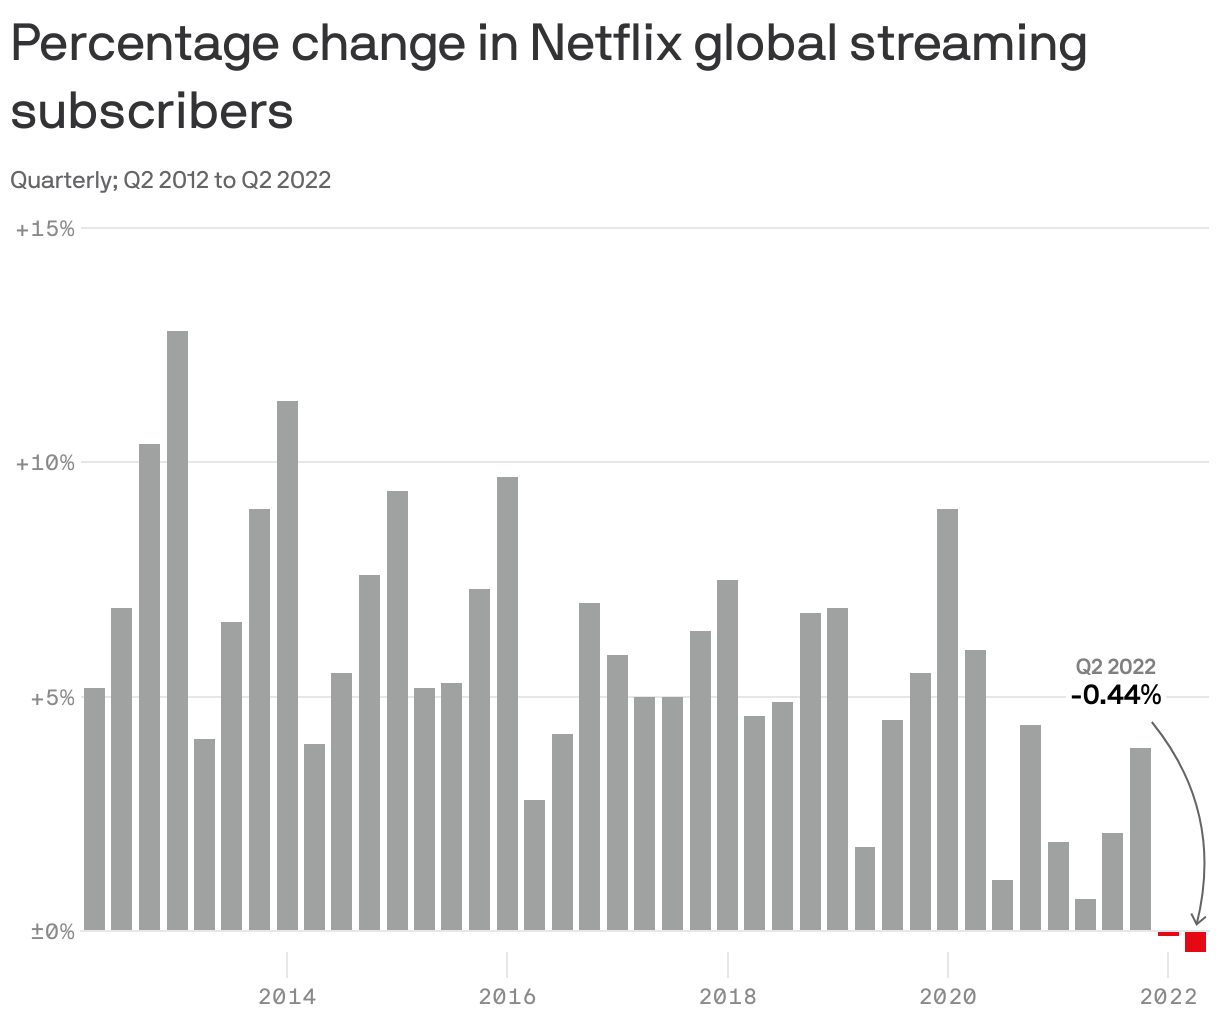 Percentage change in Netflix global streaming subscribers